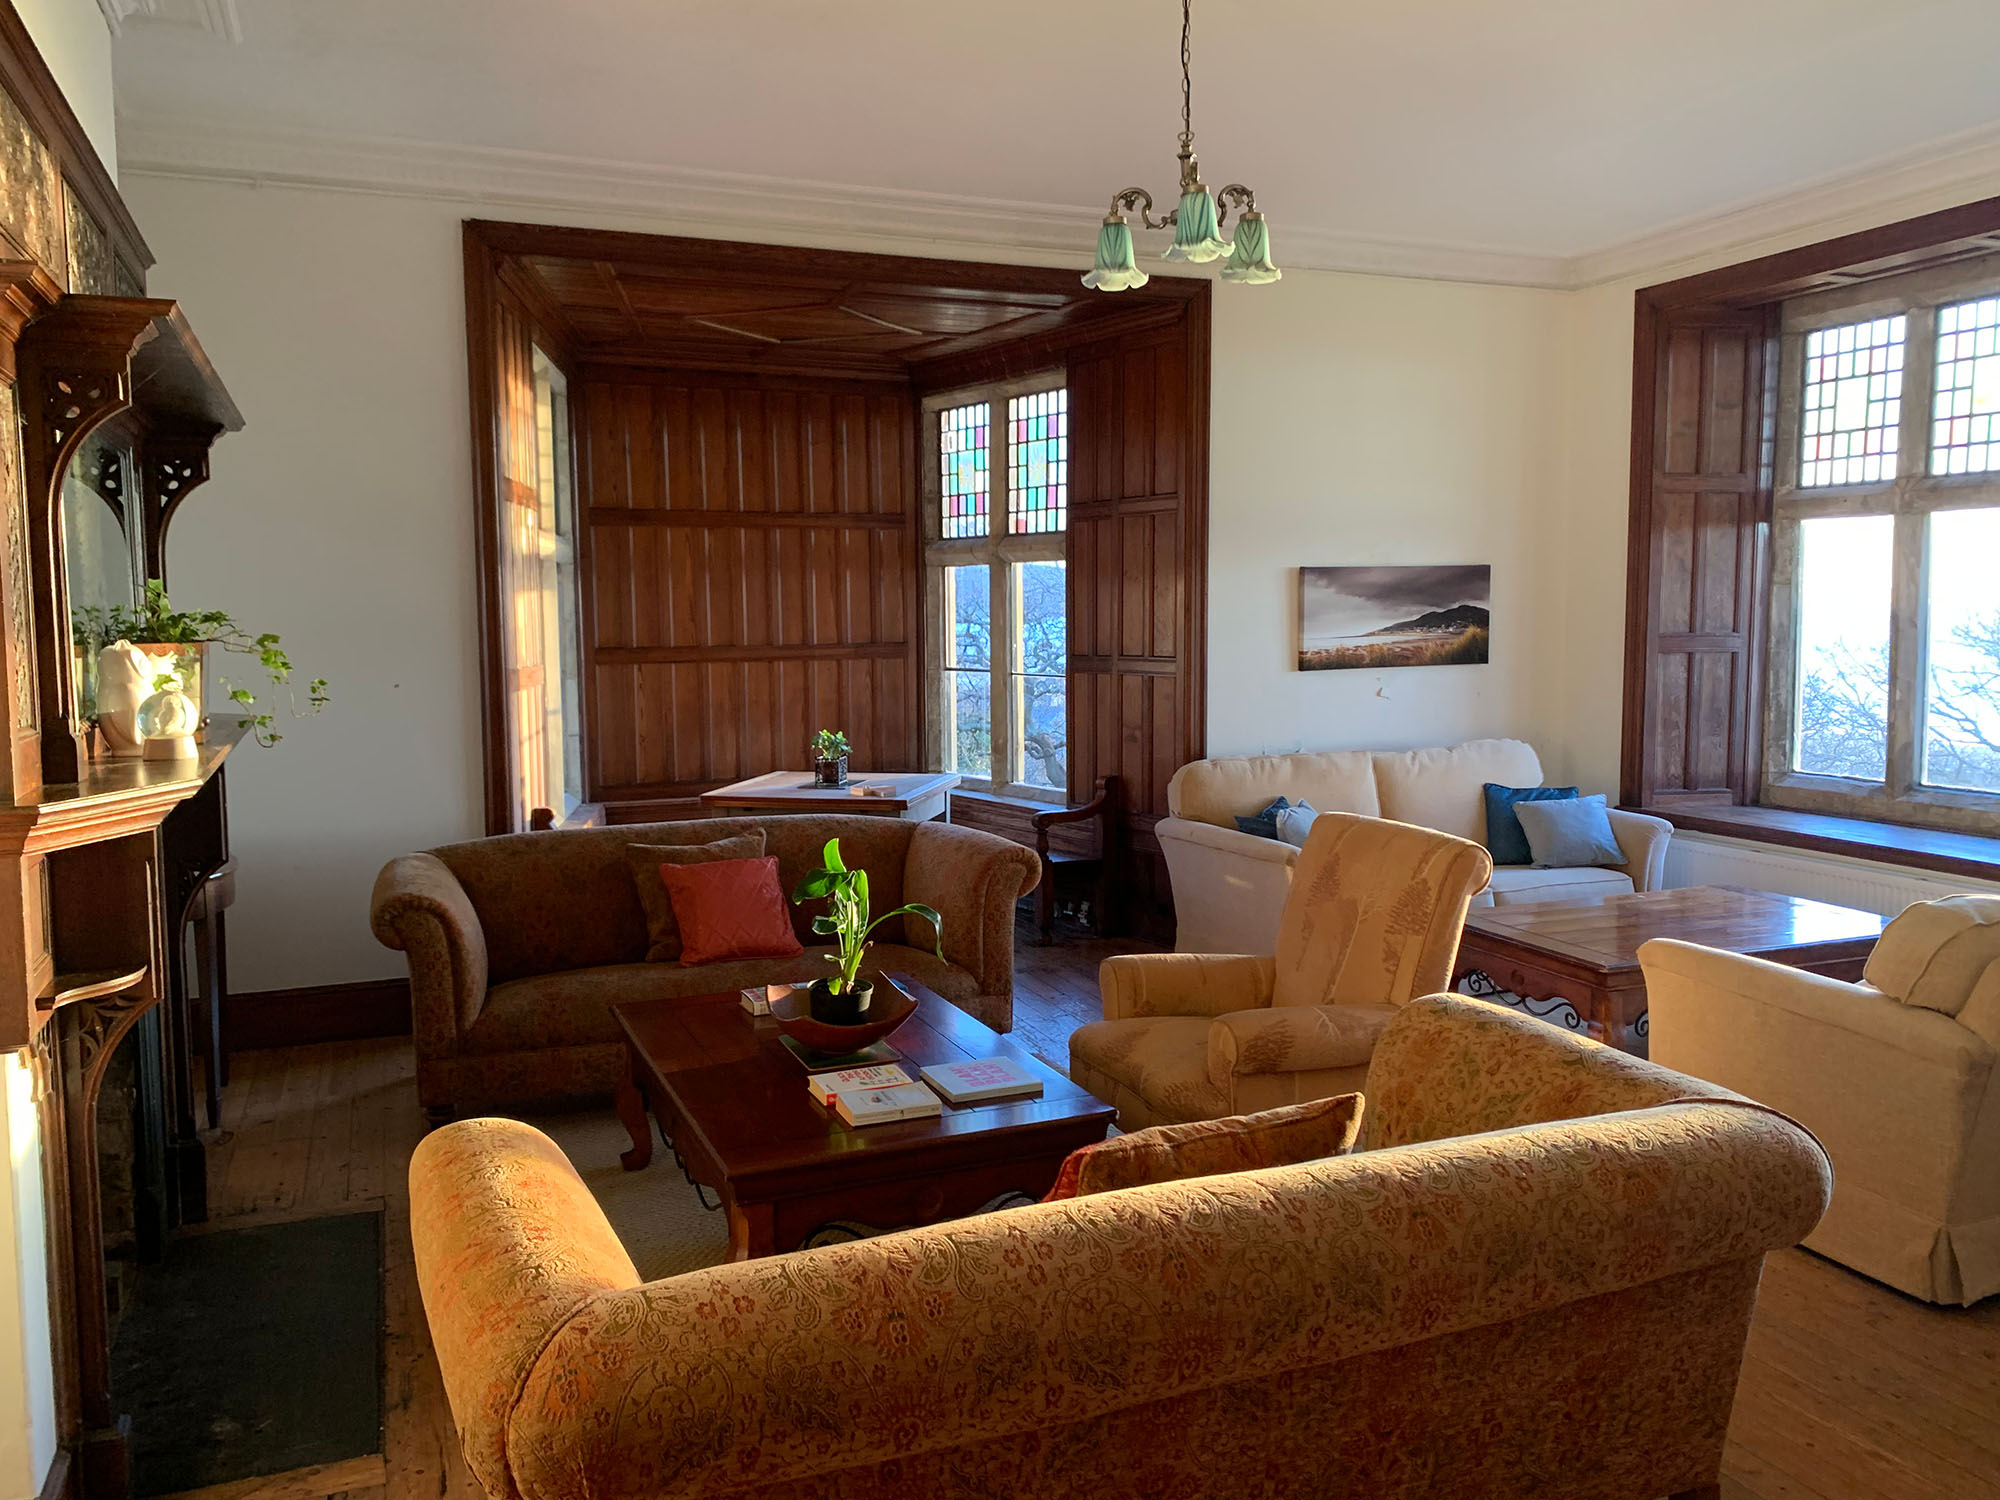 Plas Mynach - plenty of comfy seating in the large drawing room